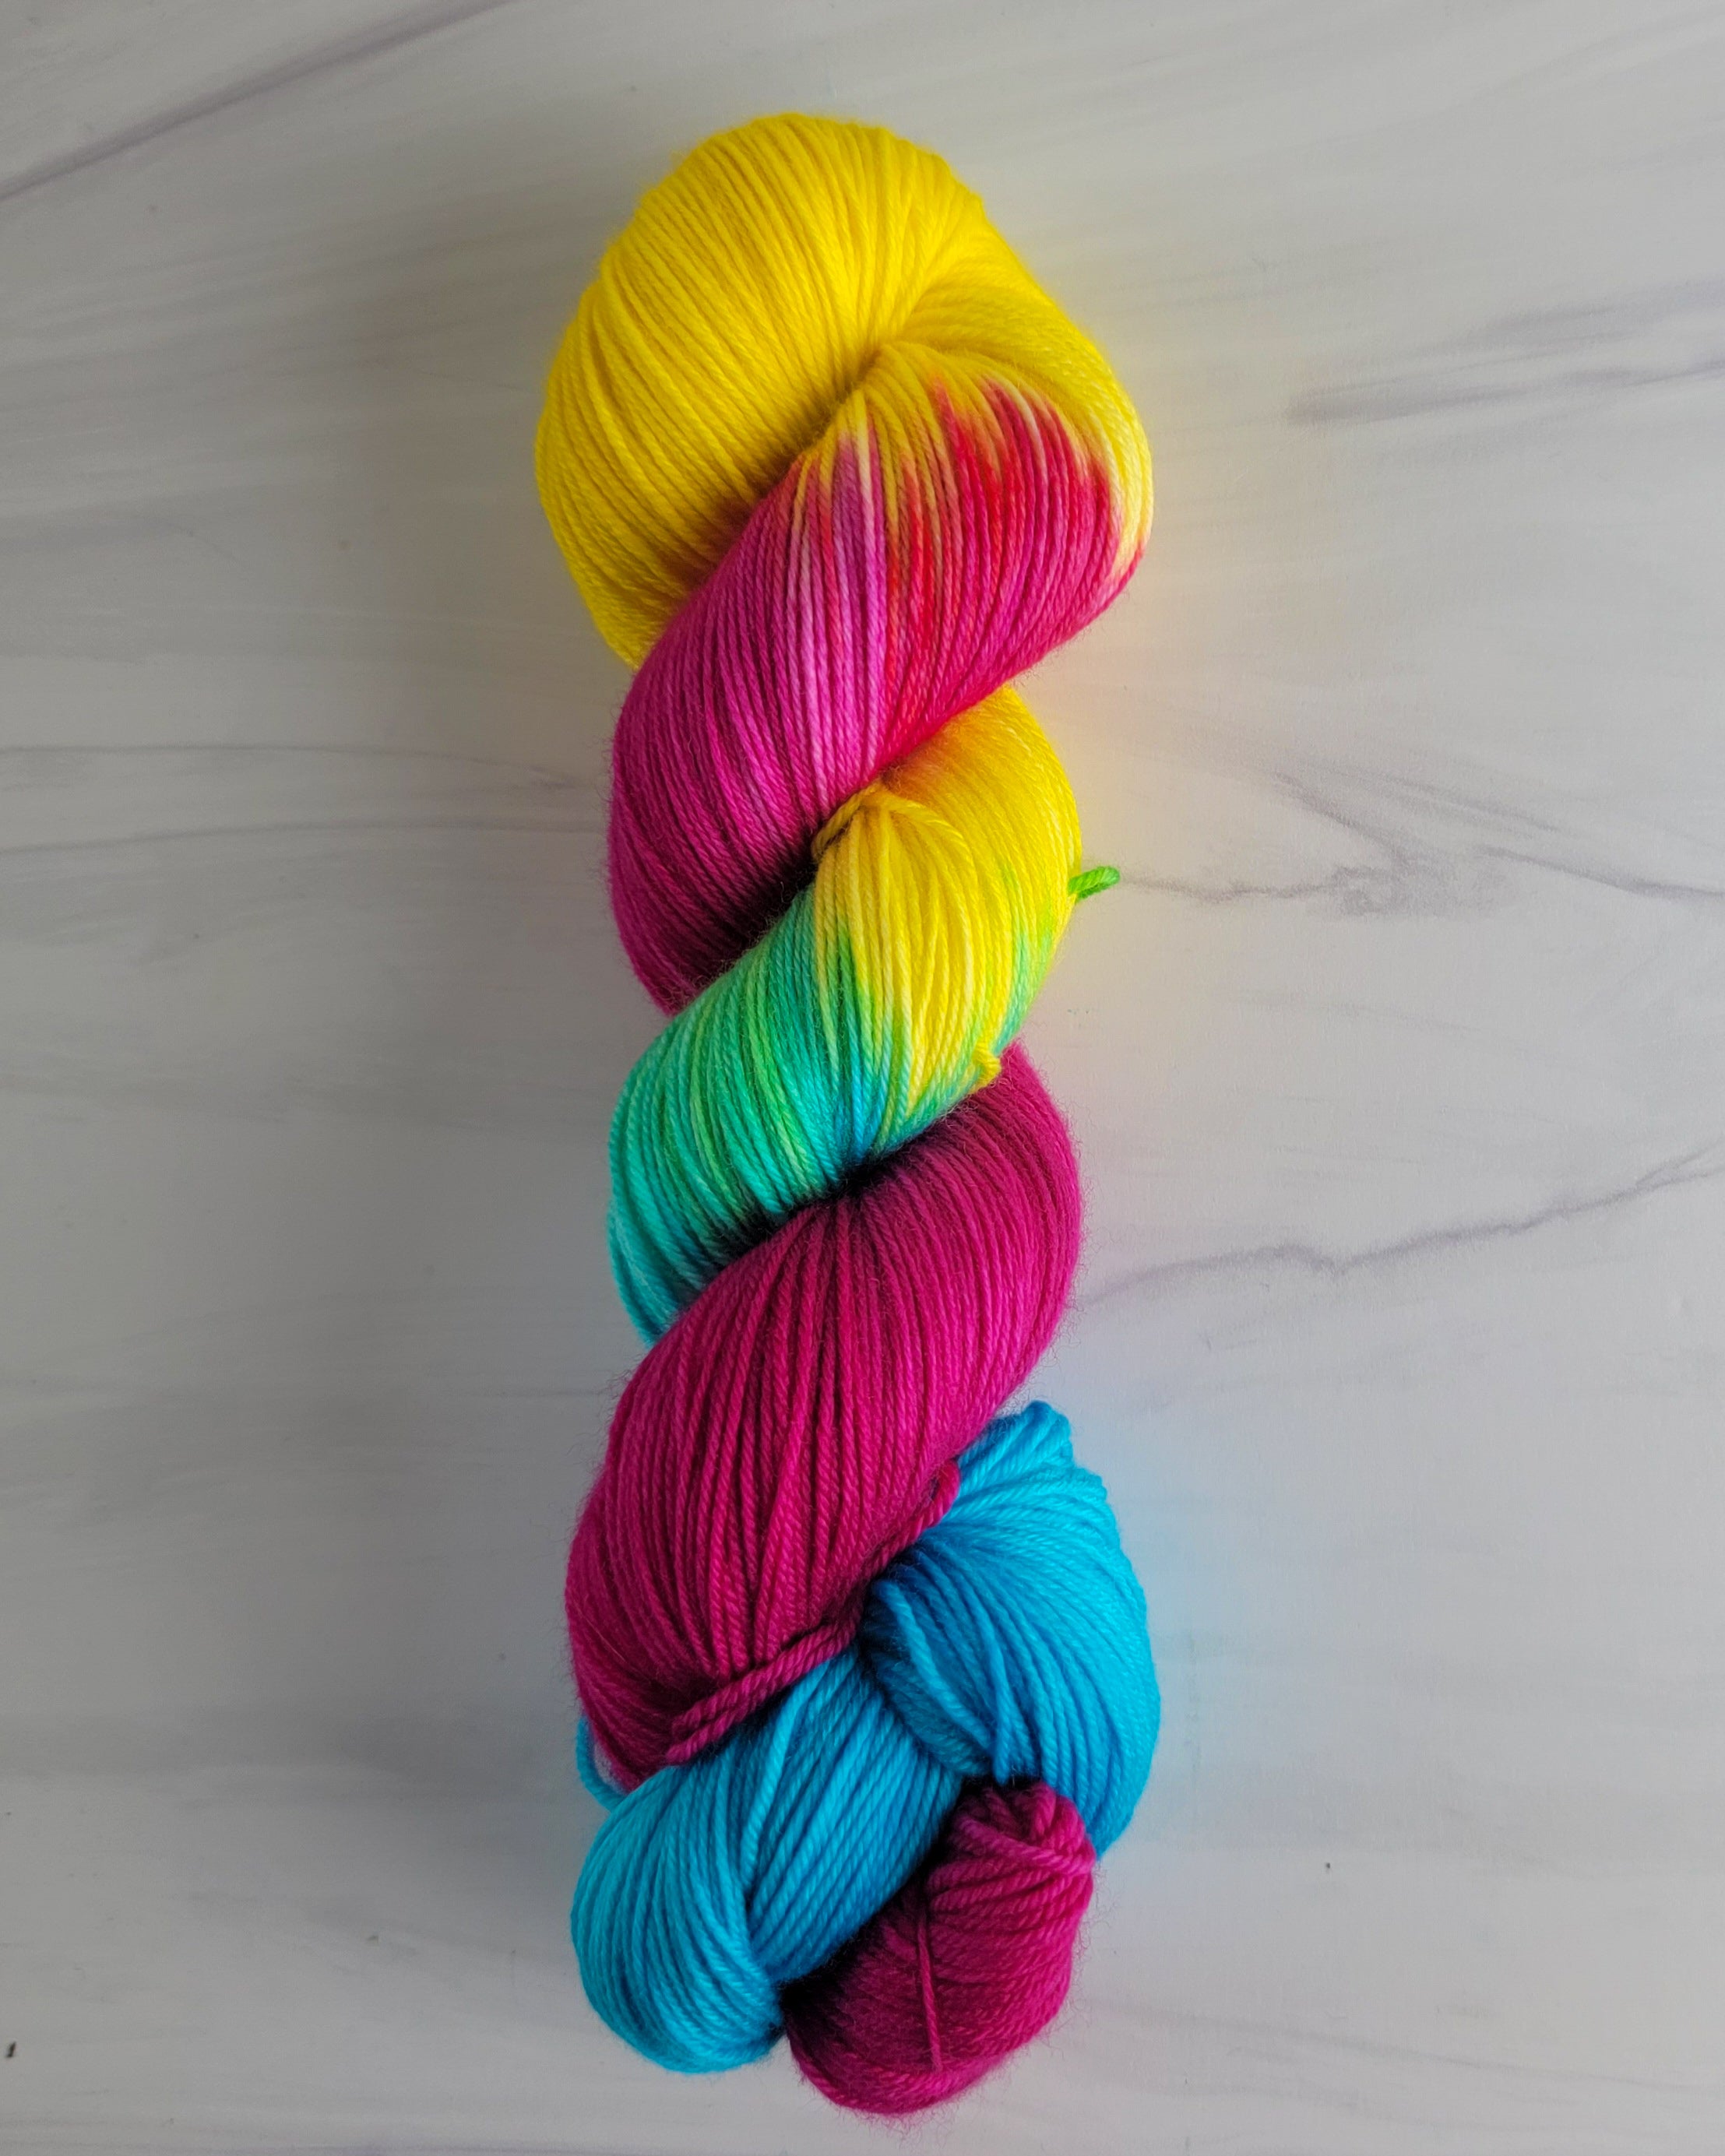 I Love Your Soul - pansexual flag - Hand dyed variegated yarn - blue y